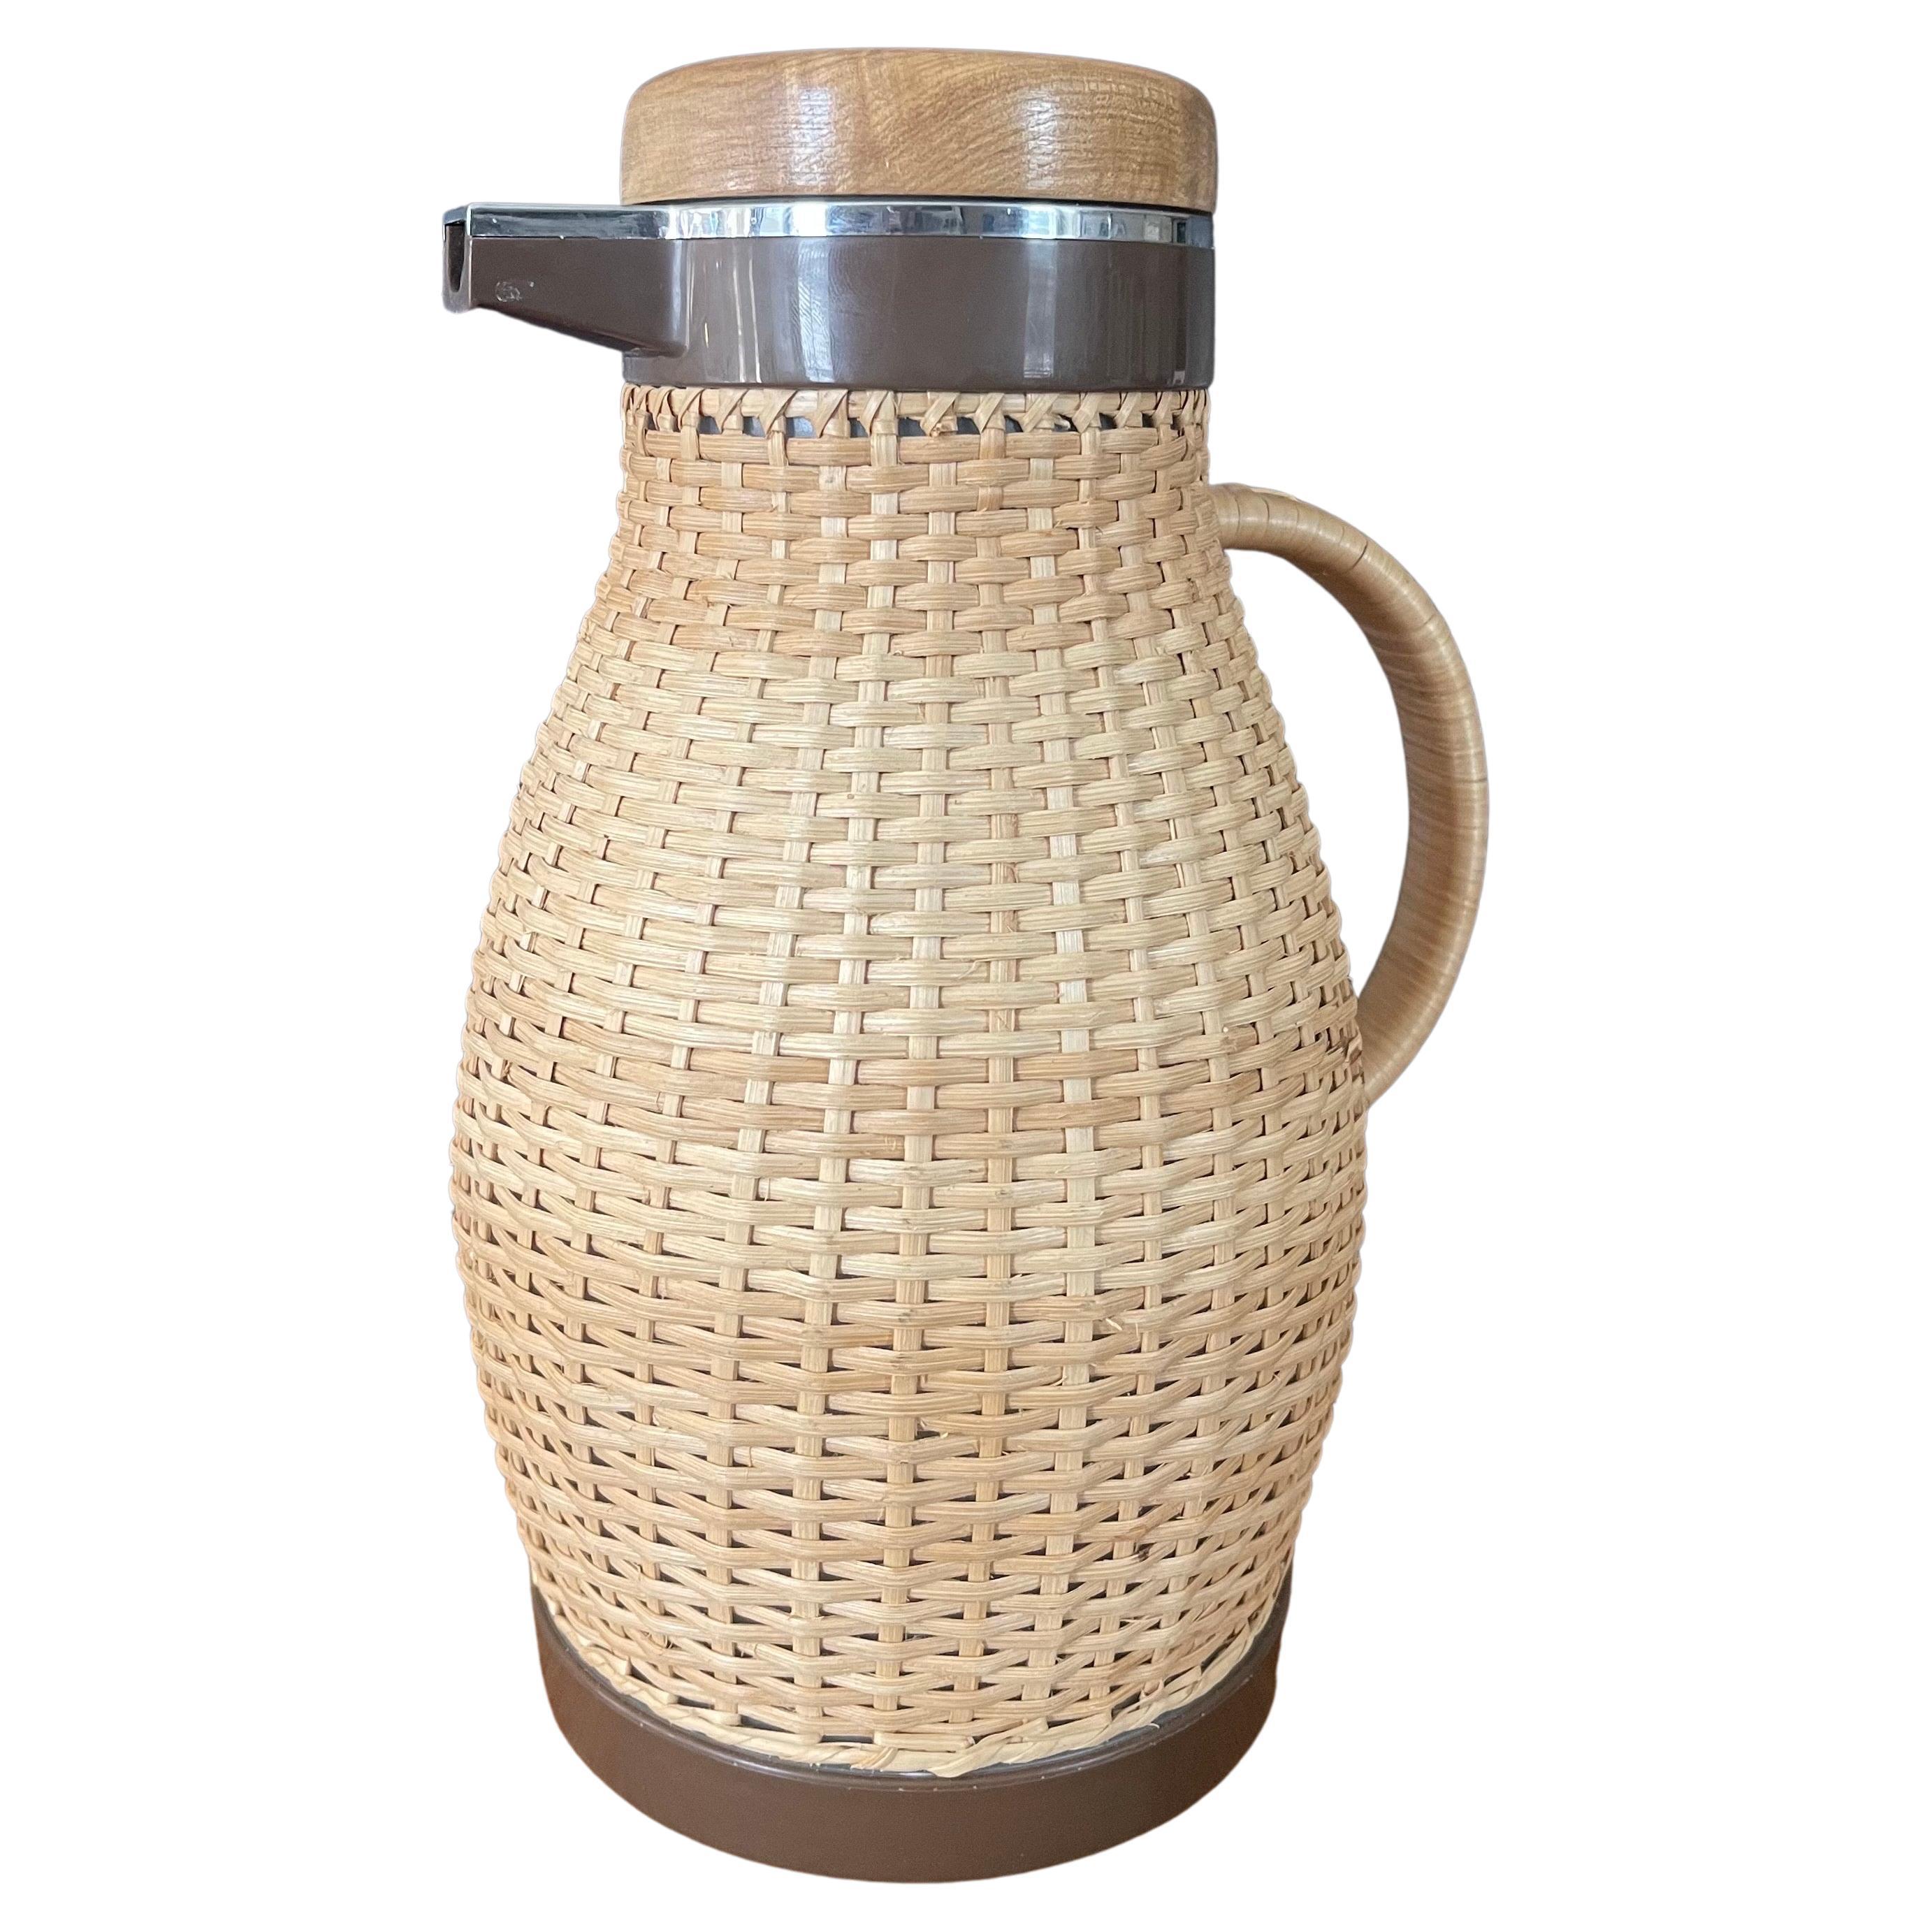 https://a.1stdibscdn.com/mcm-wicker-wrapped-thermos-coffee-carafe-pitcher-by-corning-designs-for-sale/f_9366/f_290770521655396540839/f_29077052_1655396541814_bg_processed.jpg